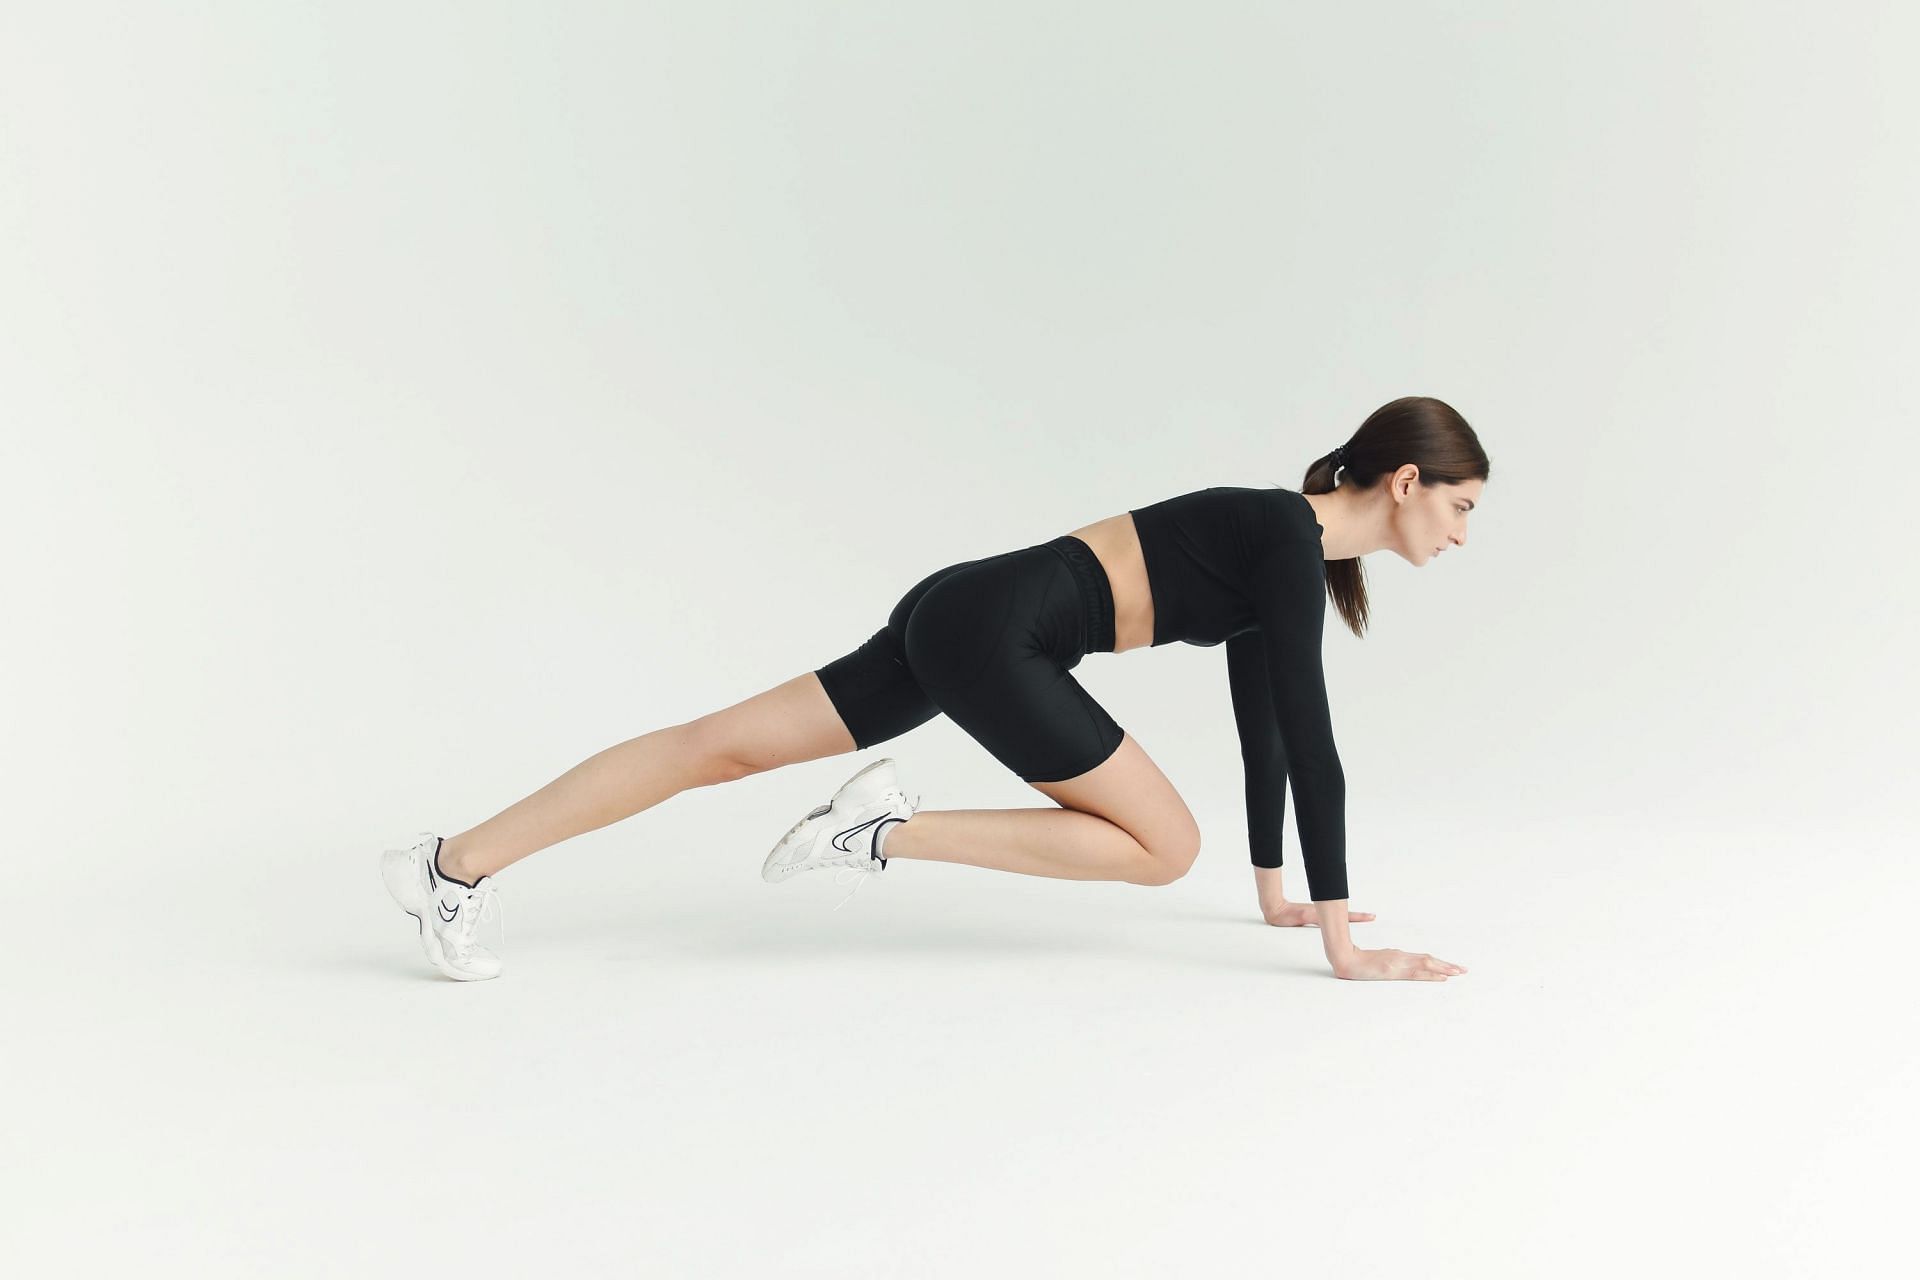 Mountain climbers are a great exercise to add to your workout for flat stomach! (Image via pexels/Polina Tankilevitch)